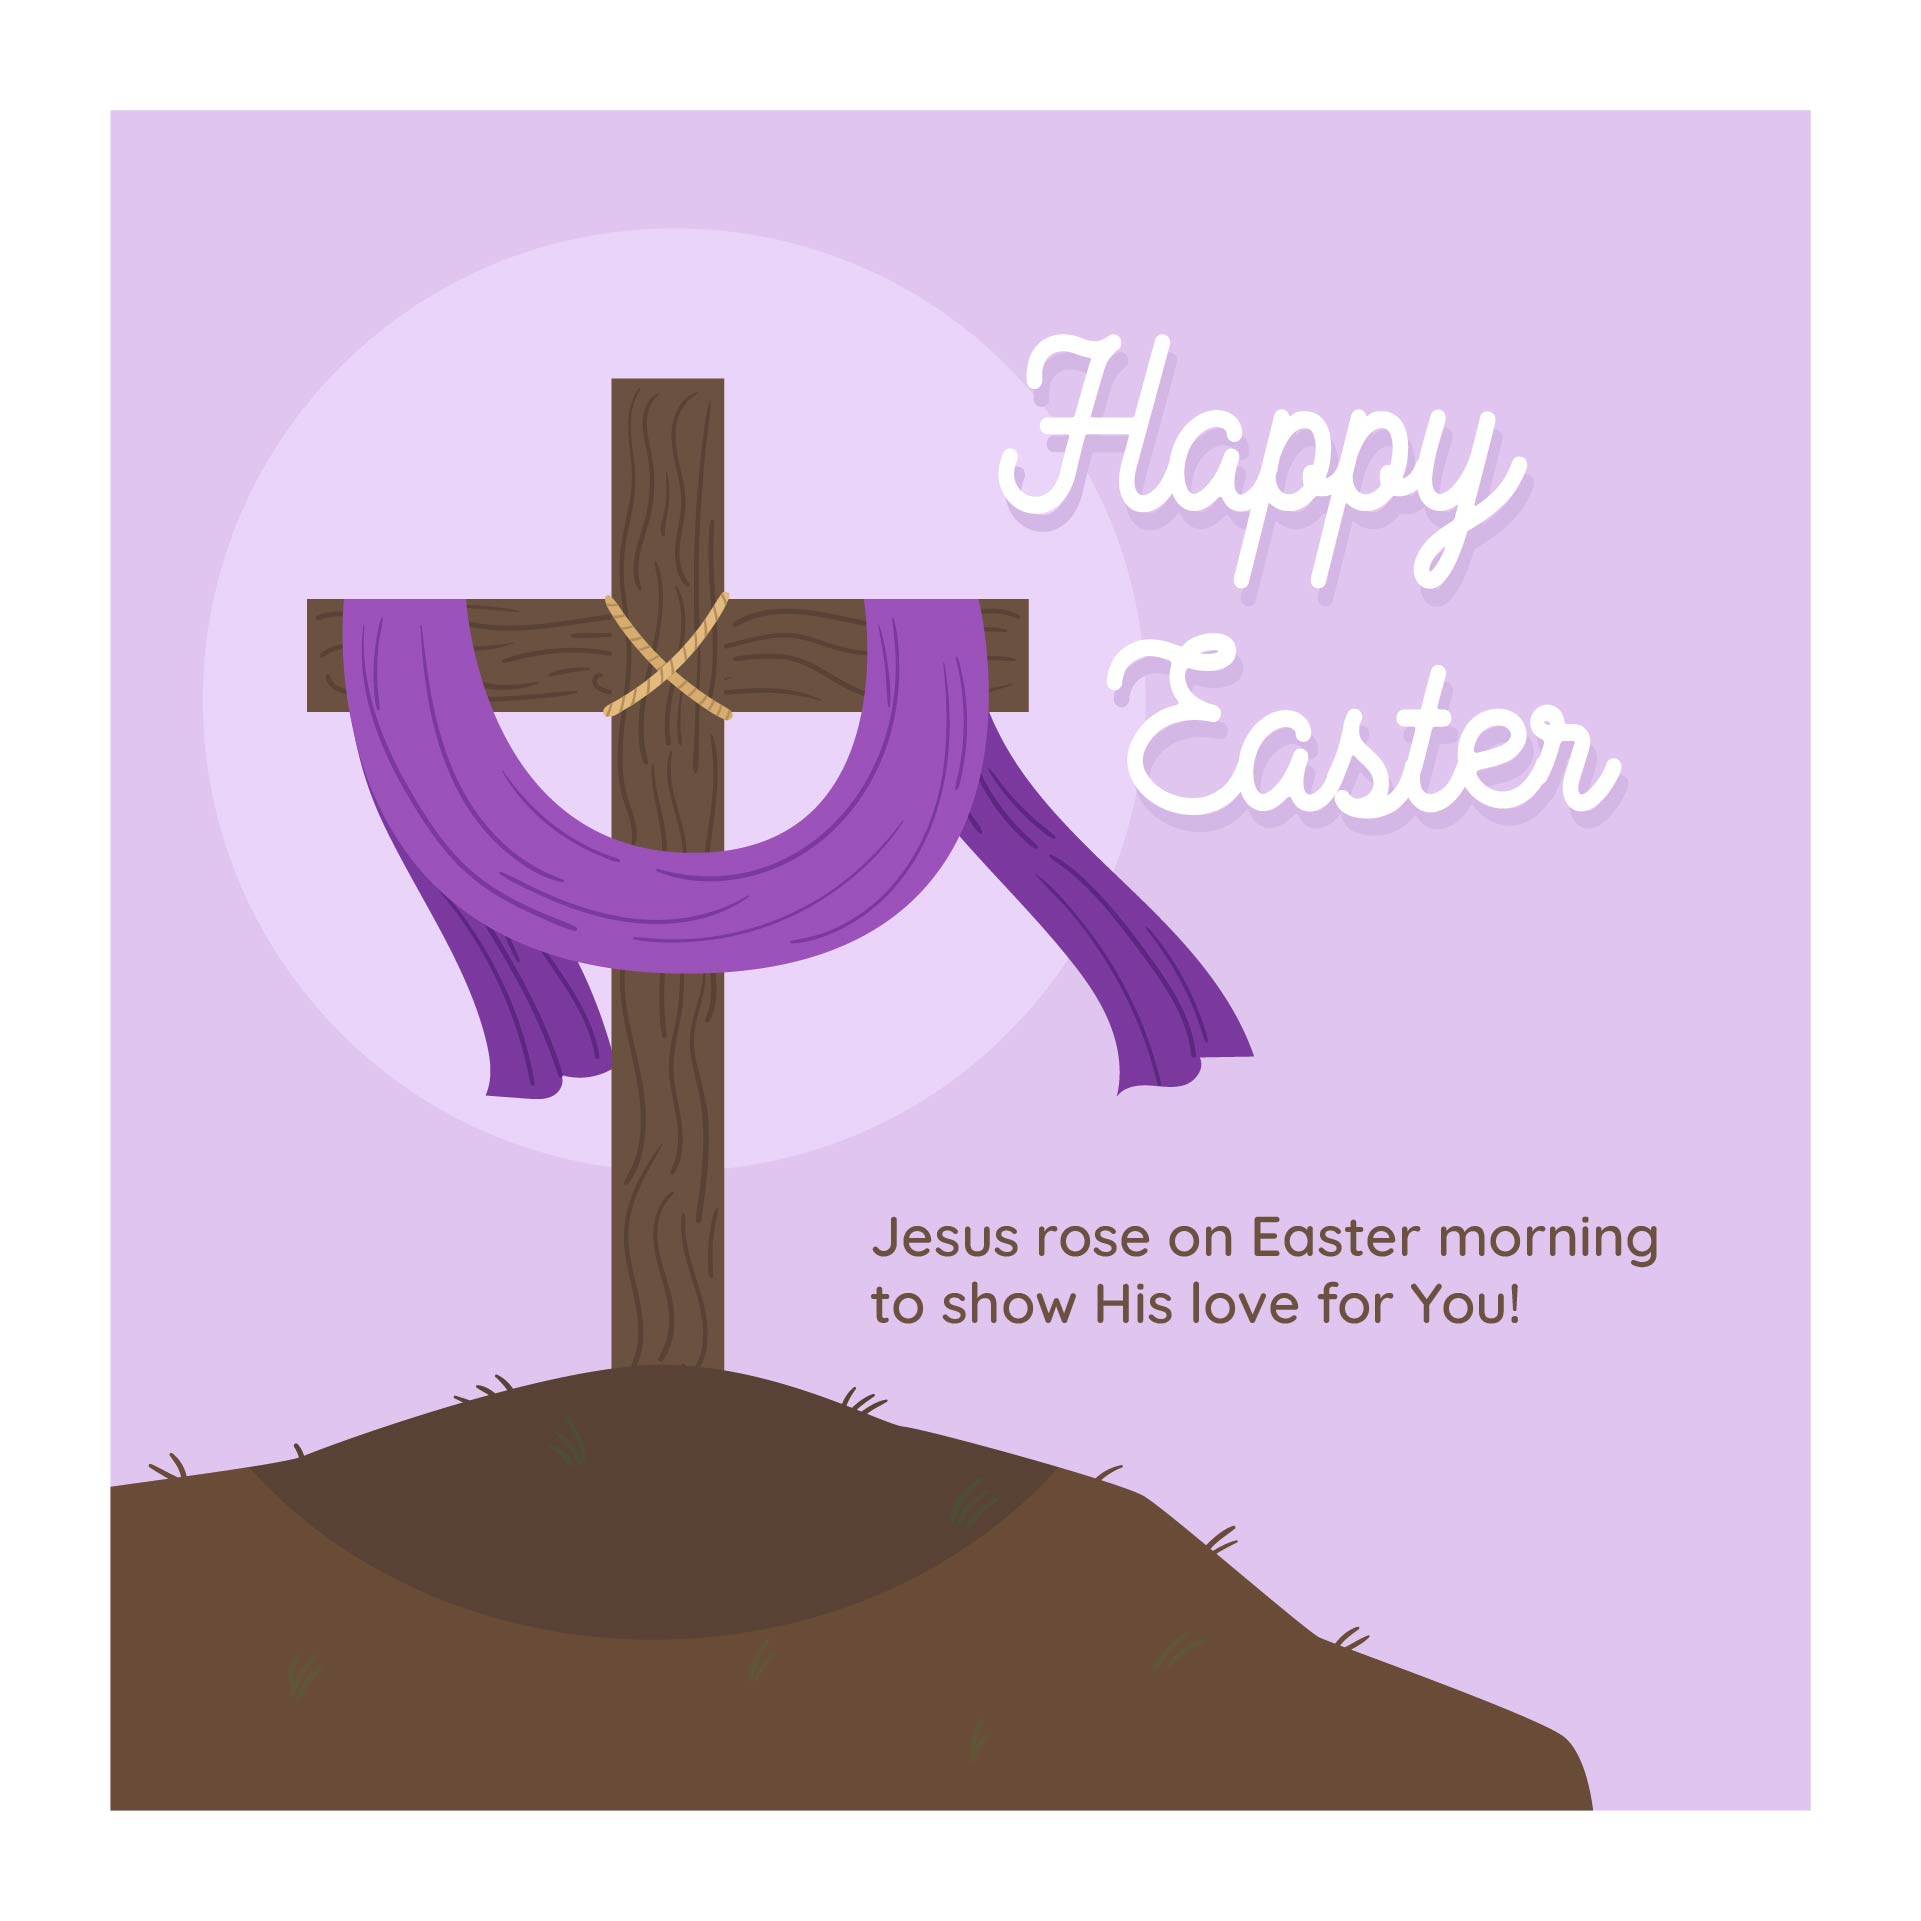 5 Best Images of Free Printable Easter Cards Religious Free Printable